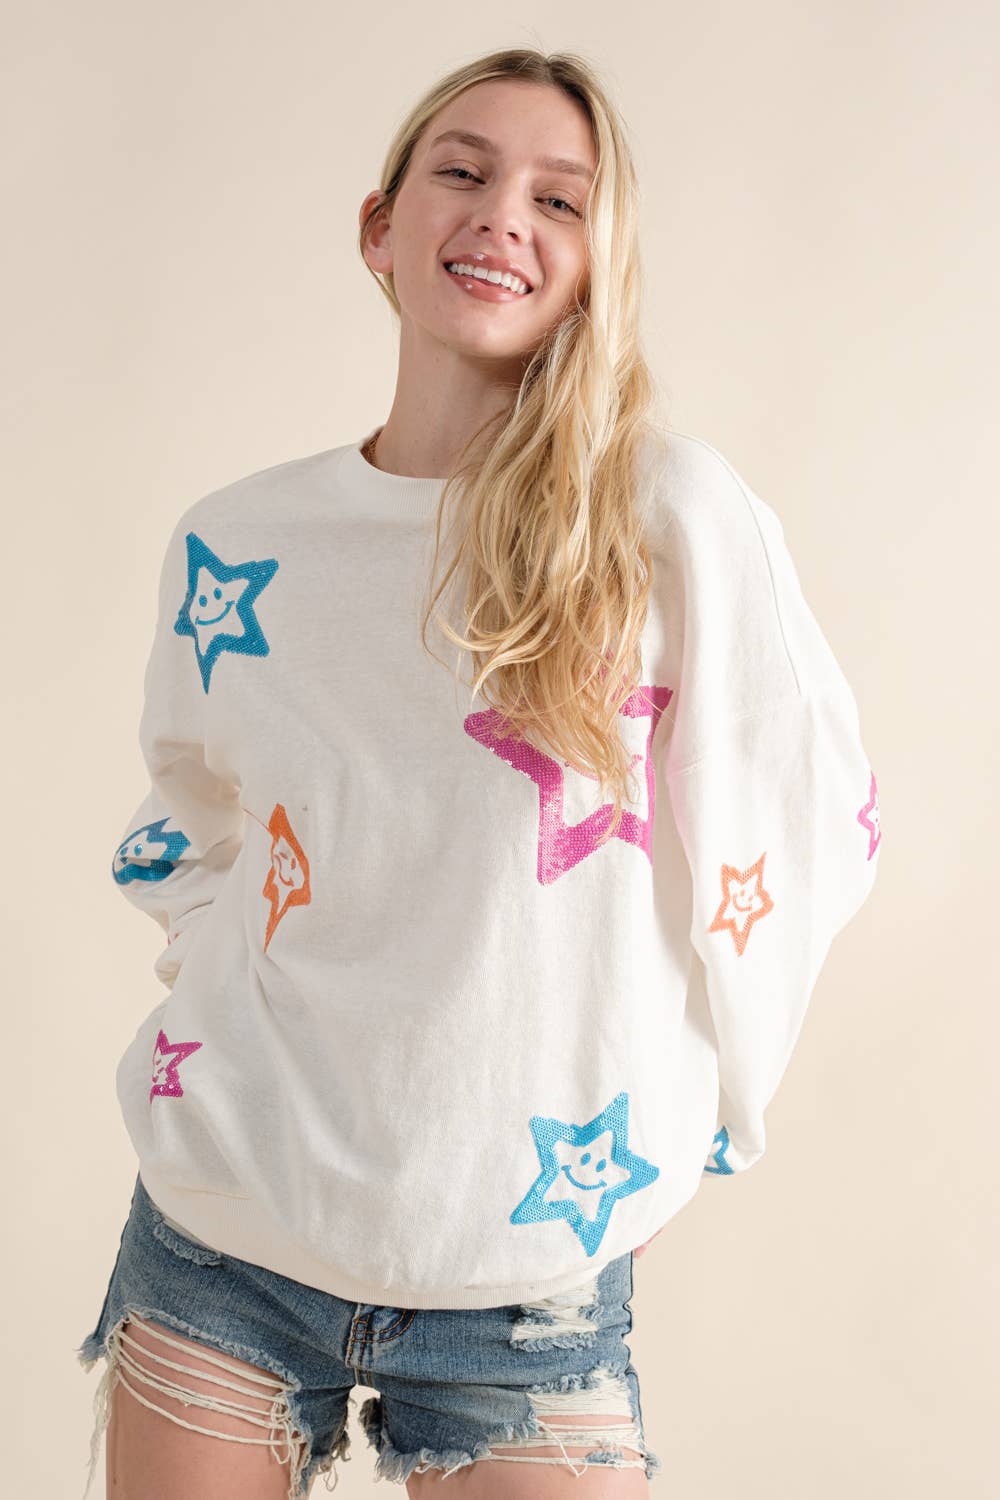 Blue B - 32960T - French Terry Star Sequin Smiley Sweatshirt: M / OFF WHITE